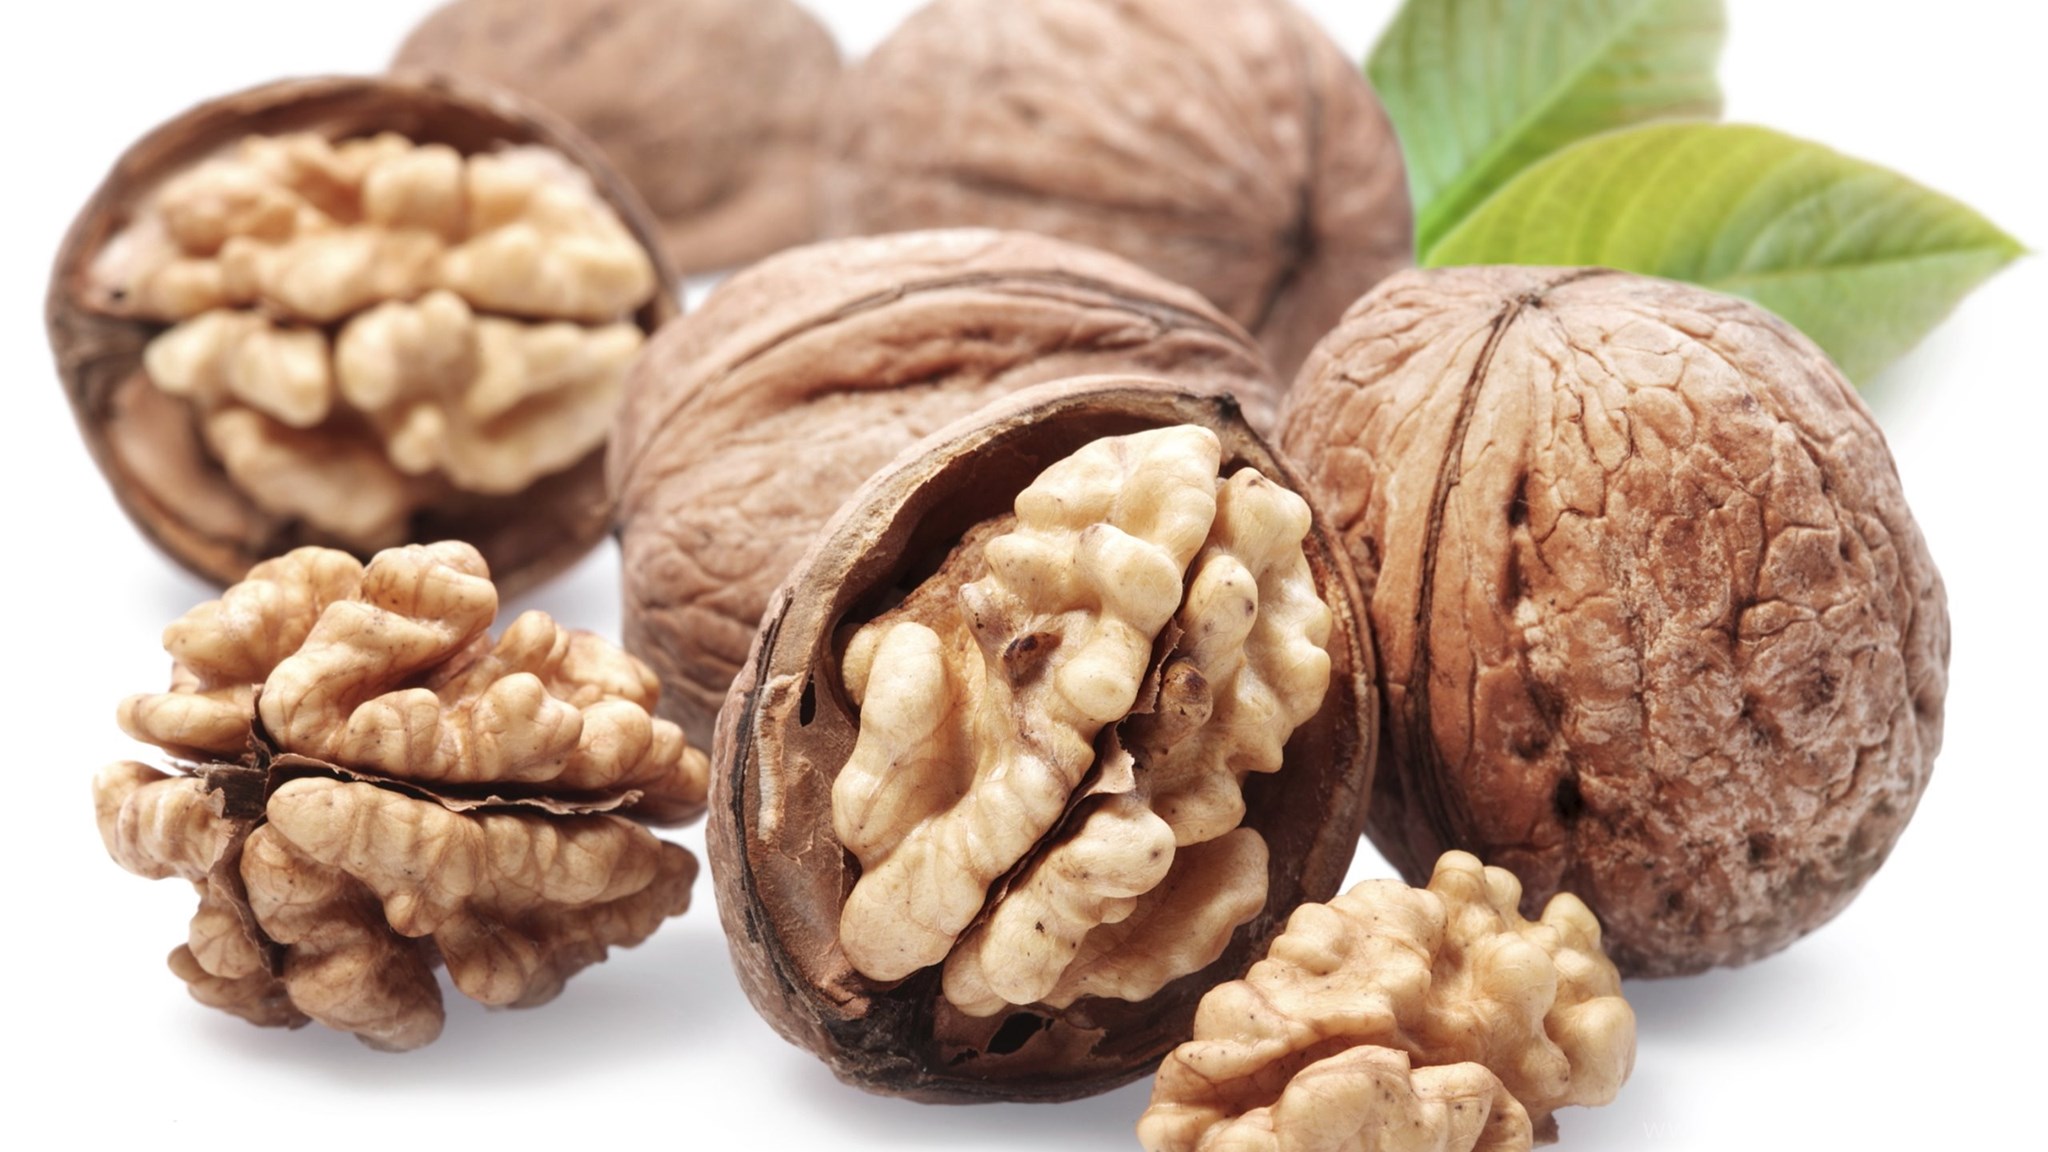 A Nutty Fact About Walnuts: They Can Help You Live Longer